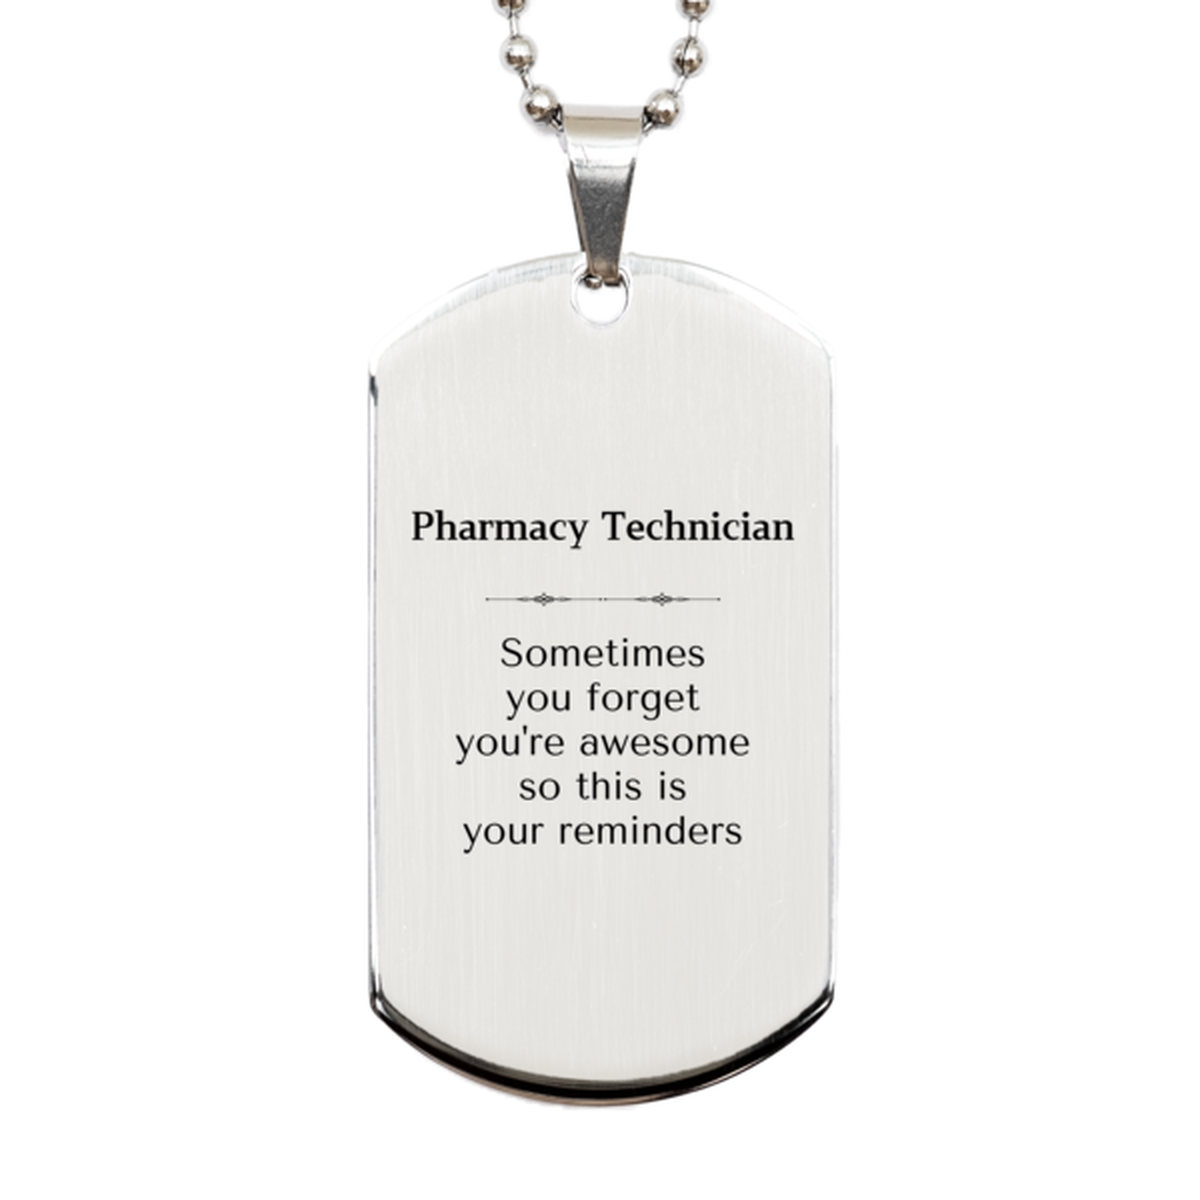 Sentimental Pharmacy Technician Silver Dog Tag, Pharmacy Technician Sometimes you forget you're awesome so this is your reminders, Graduation Christmas Birthday Gifts for Pharmacy Technician, Men, Women, Coworkers